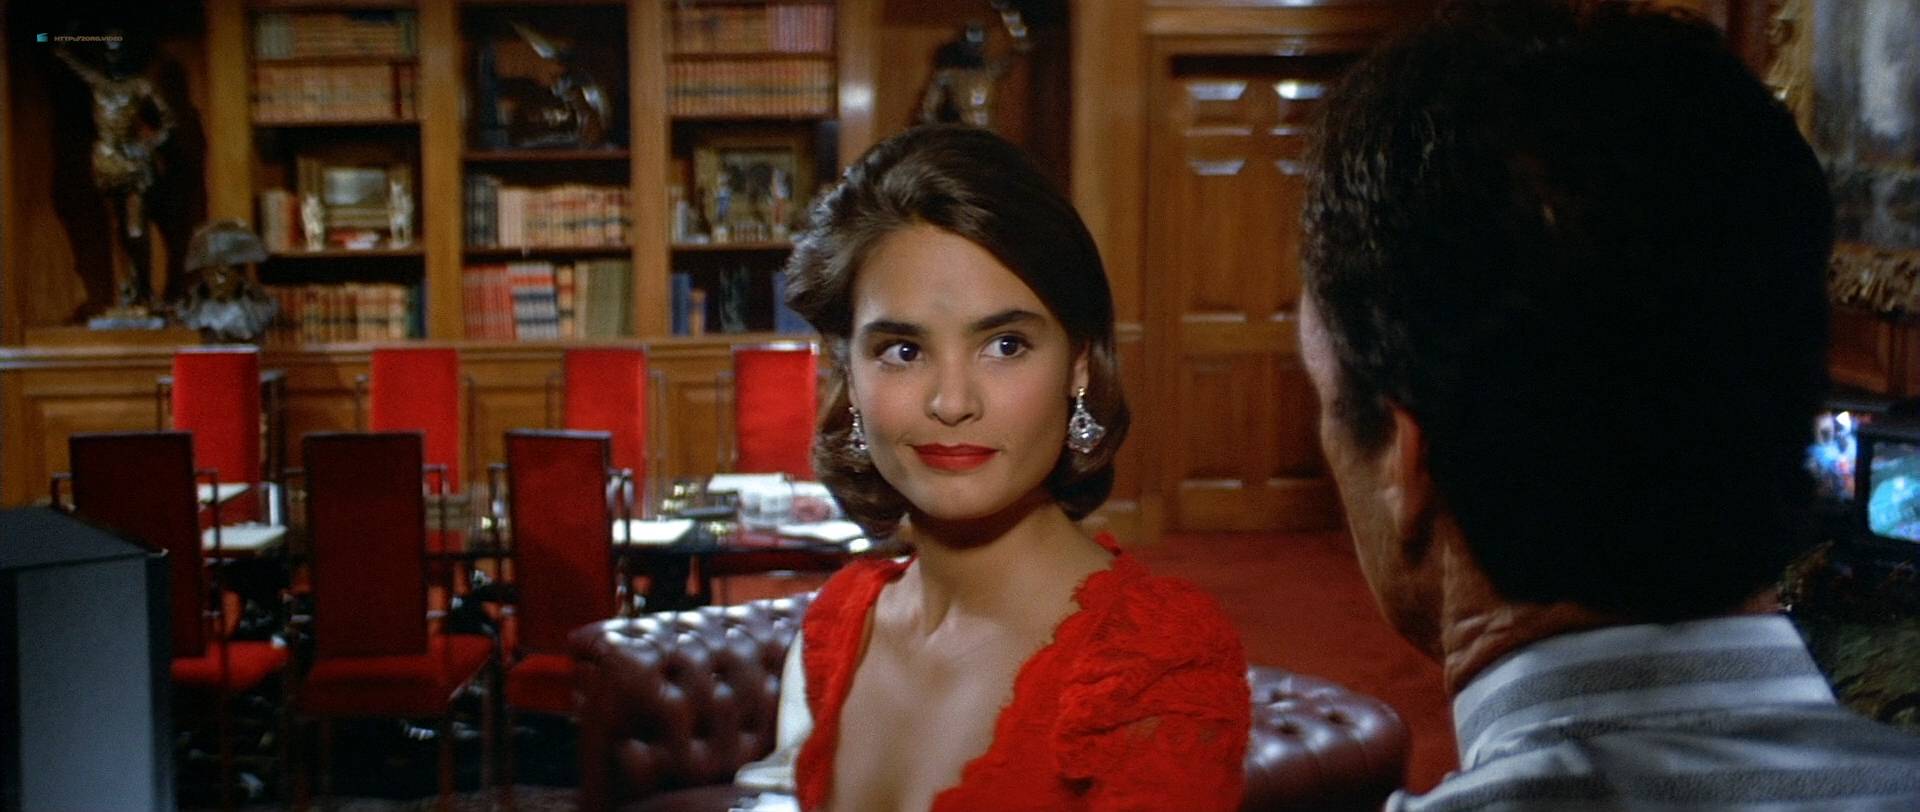 Carey Lowell hot leggy Talisa Soto hot and sexy - Licence to Kill (1989) HD 1080p BluRay (18)